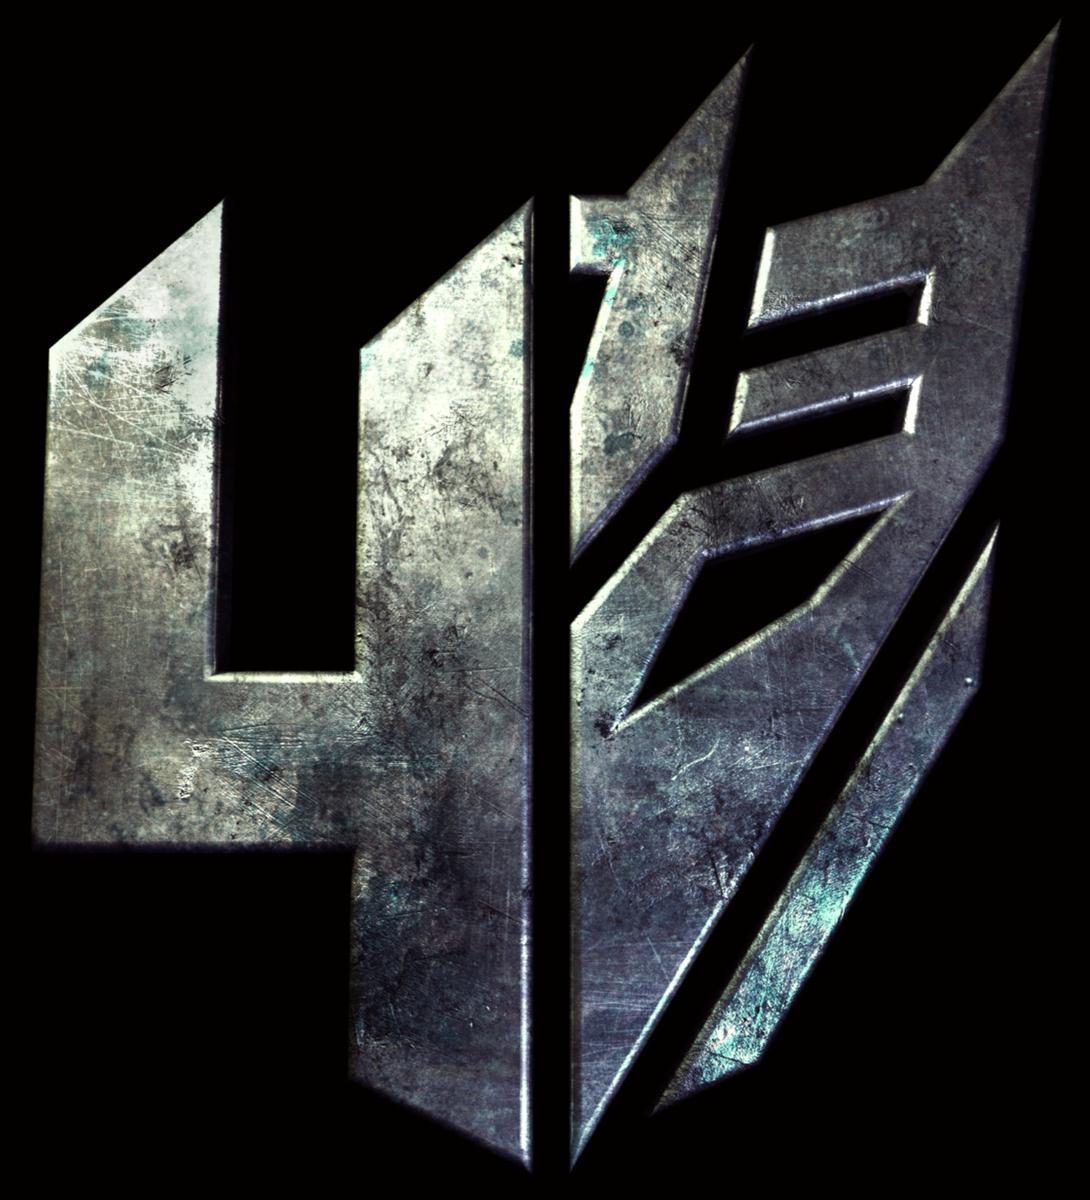 Transformers 4 Logo - House fire on Transformers 4 set in Pflugerville